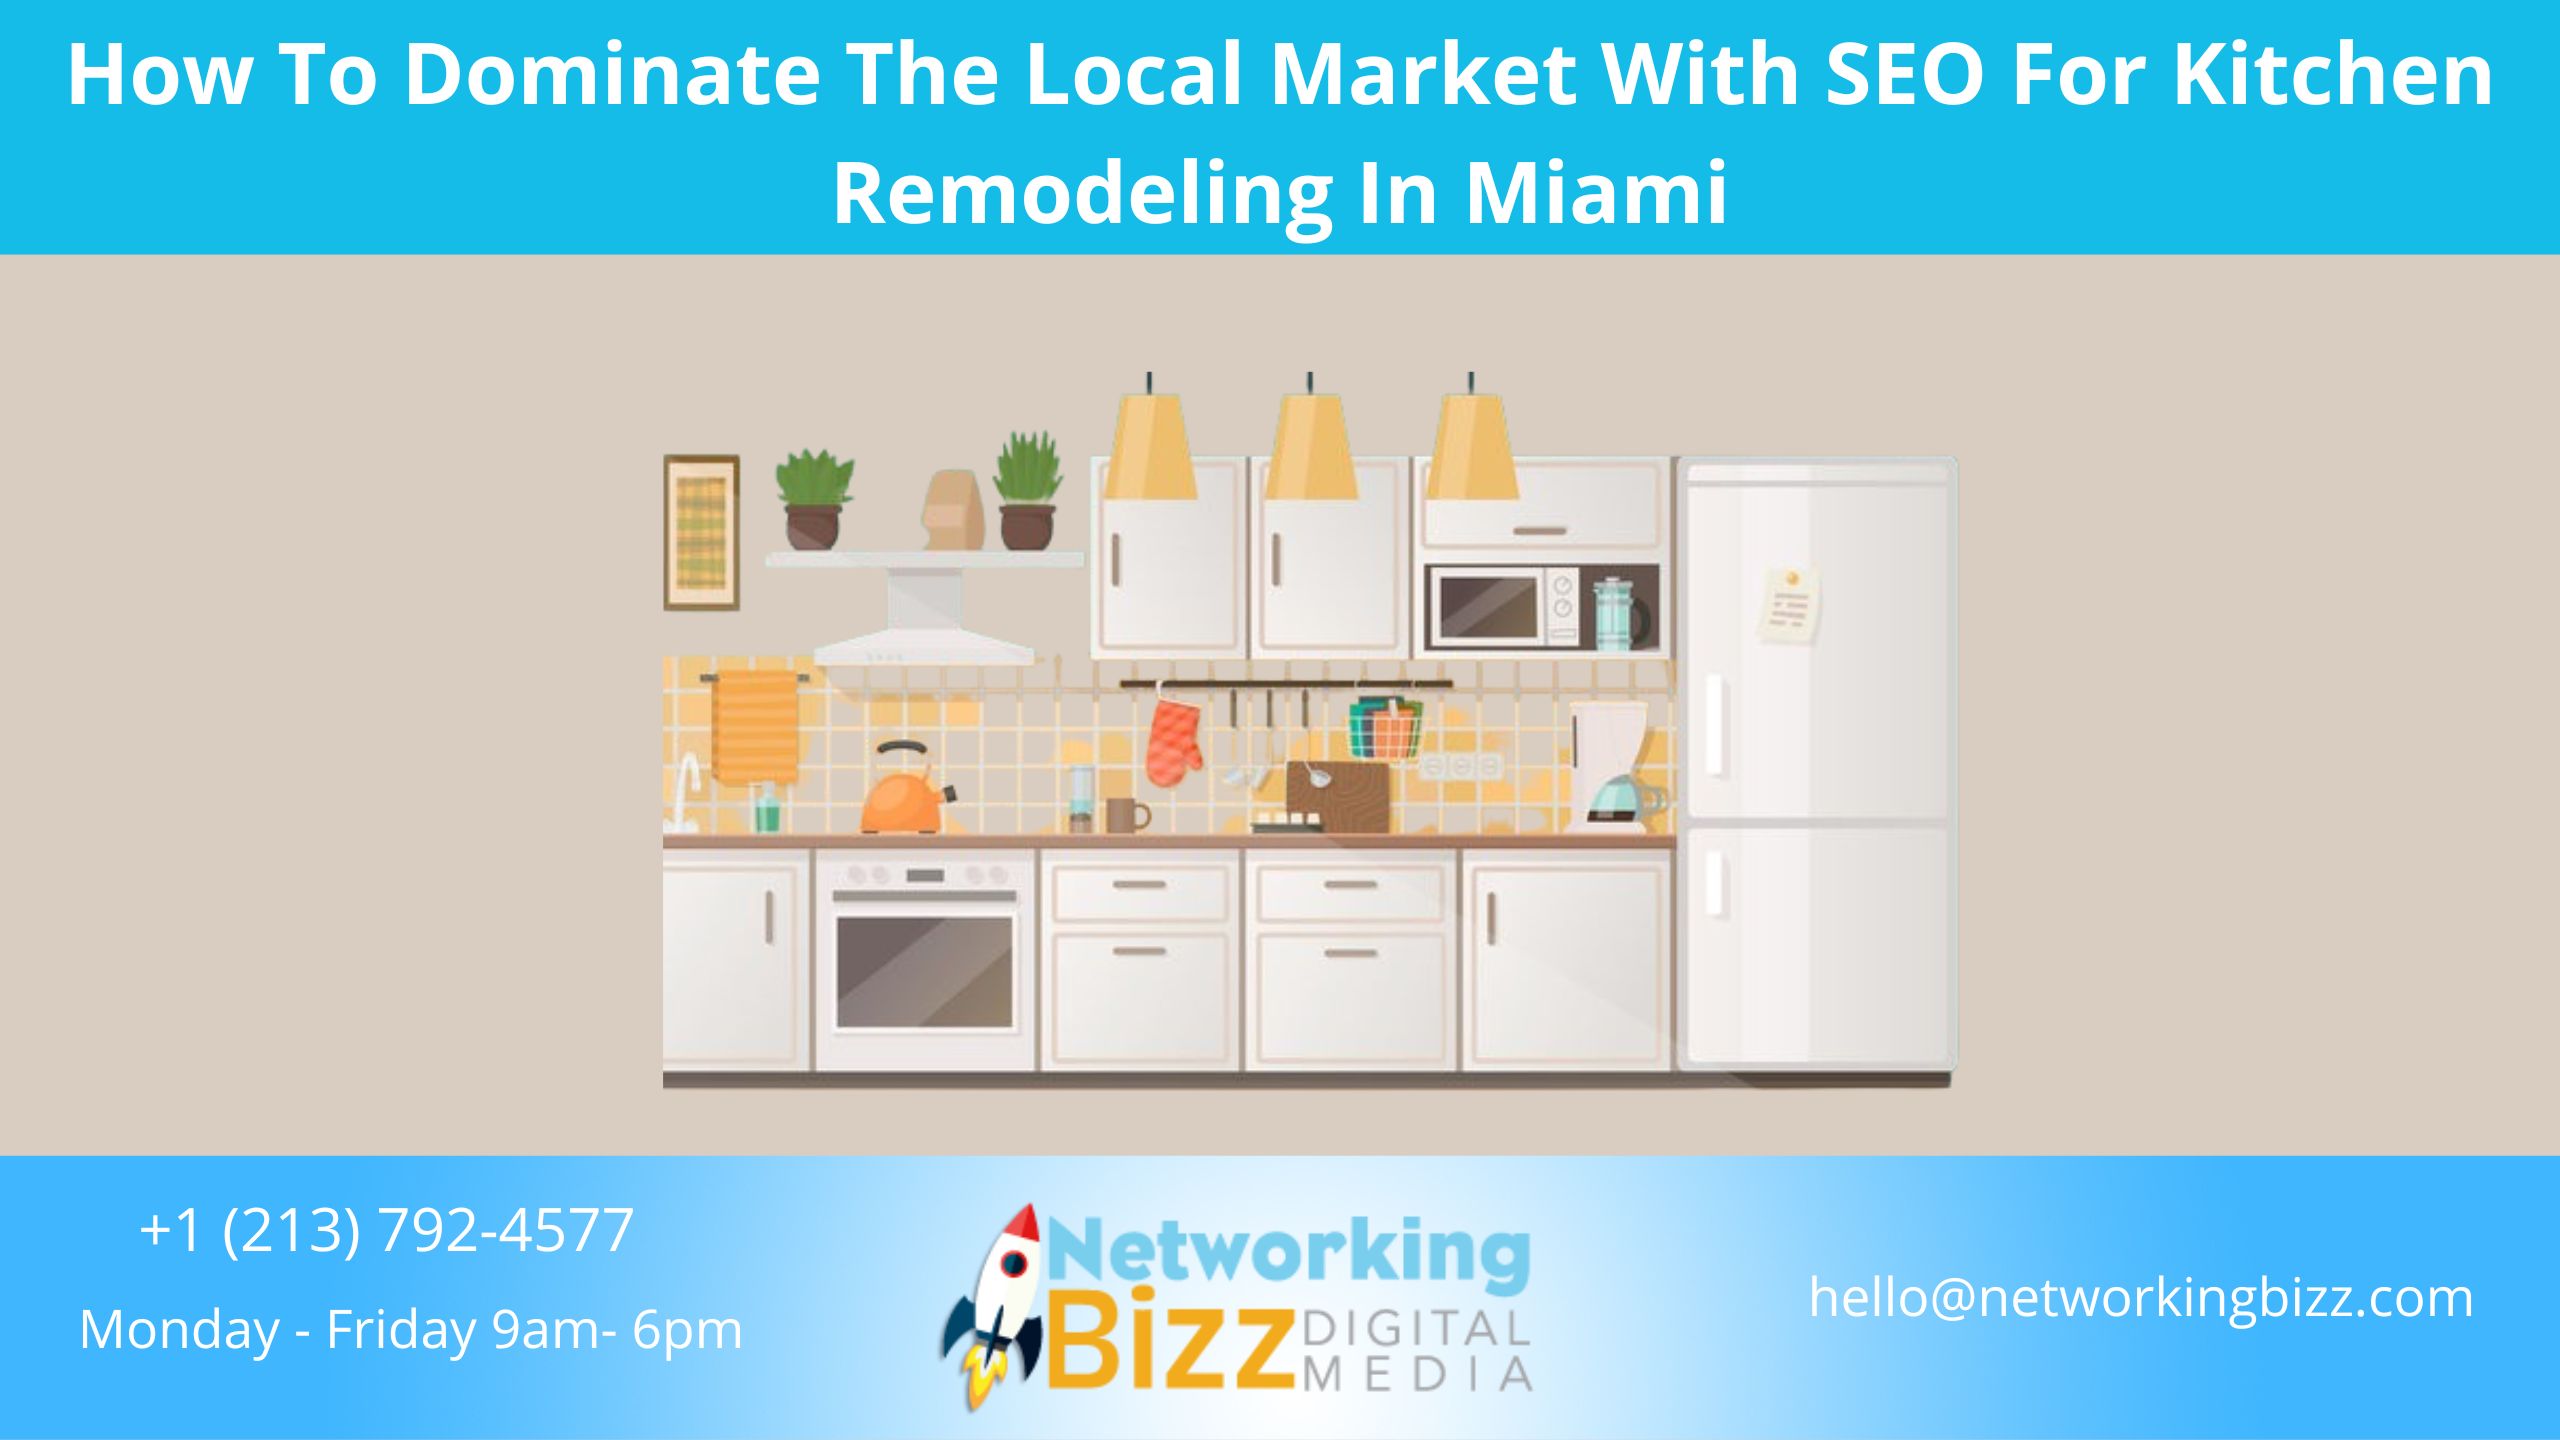 How To Dominate The Local Market With SEO For Kitchen Remodeling In Miami